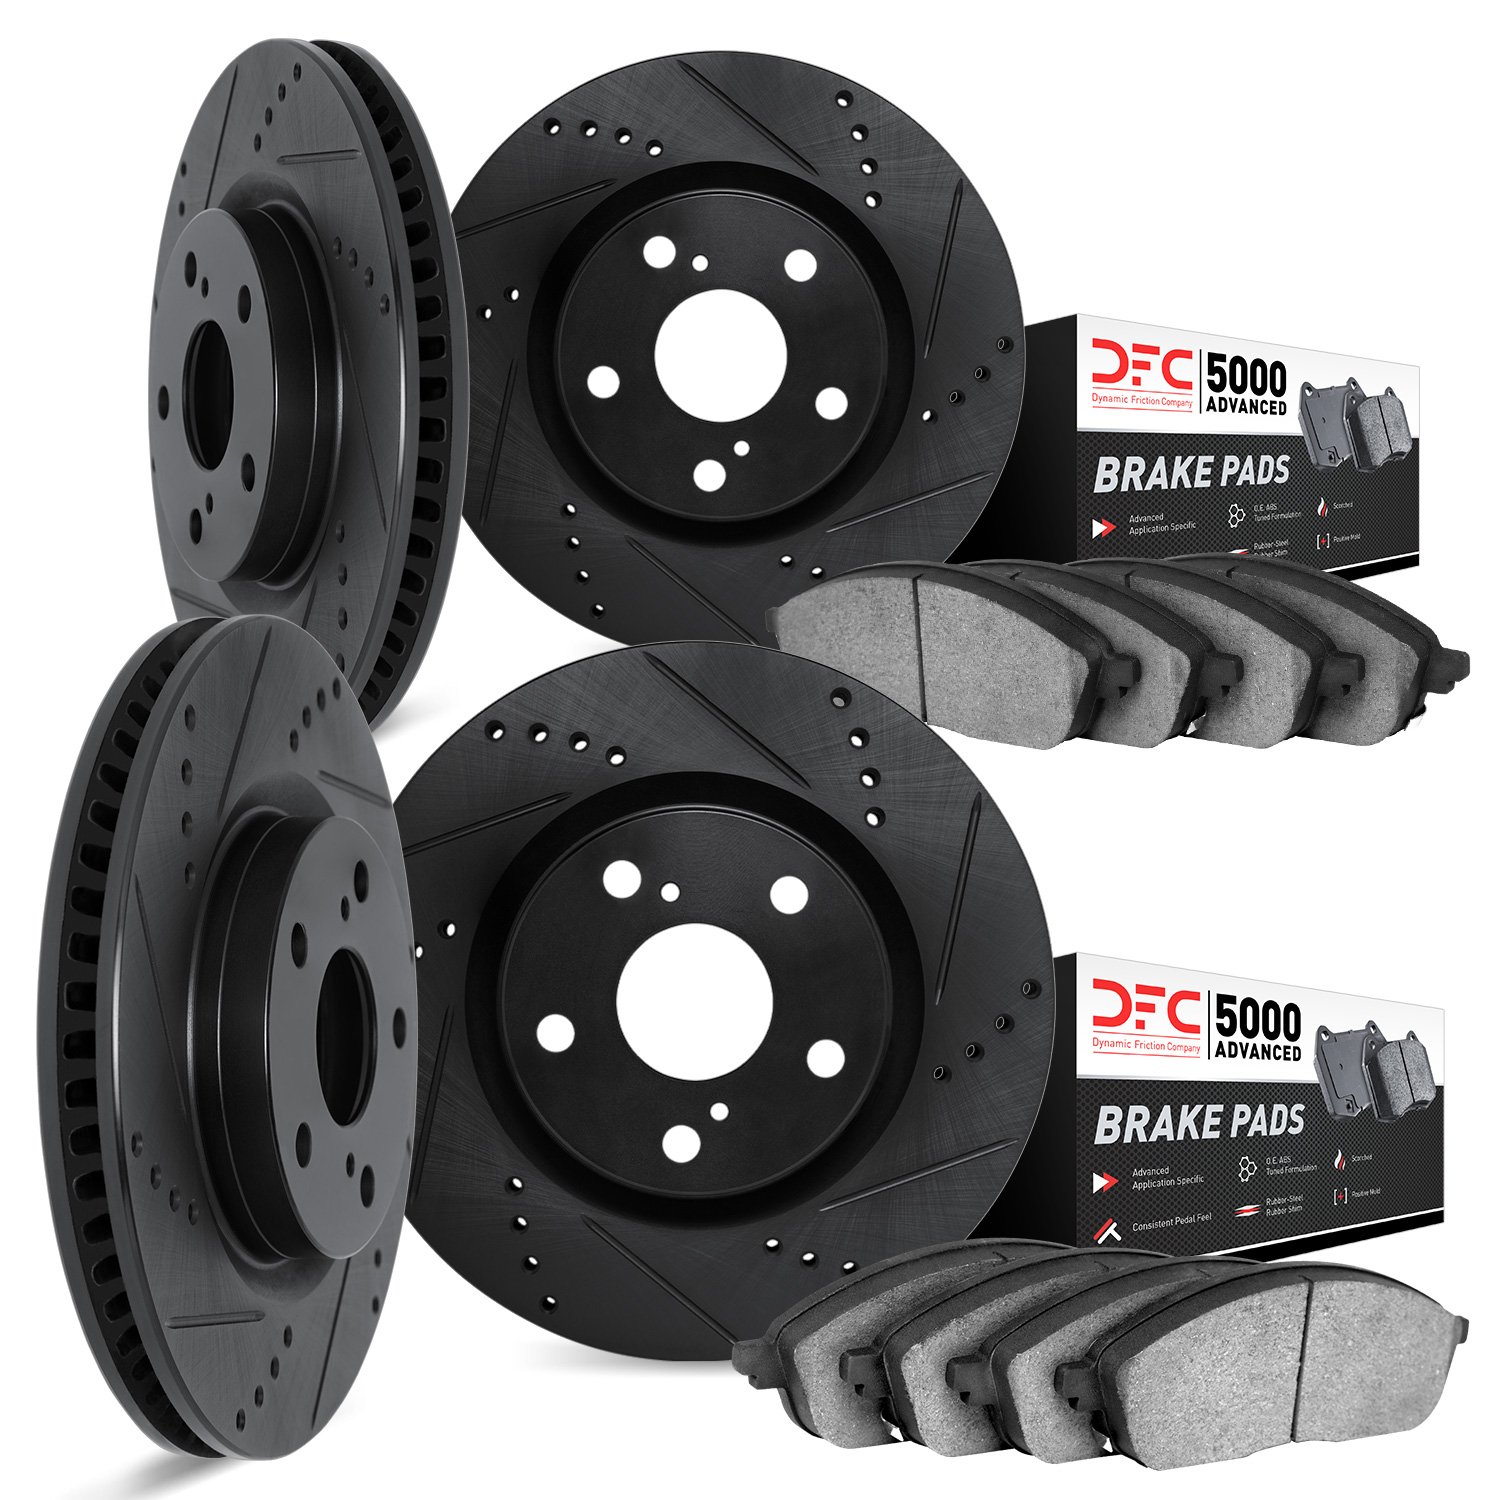 8504-75009 Drilled/Slotted Brake Rotors w/5000 Advanced Brake Pads Kit [Black], Fits Select Lexus/Toyota/Scion, Position: Front